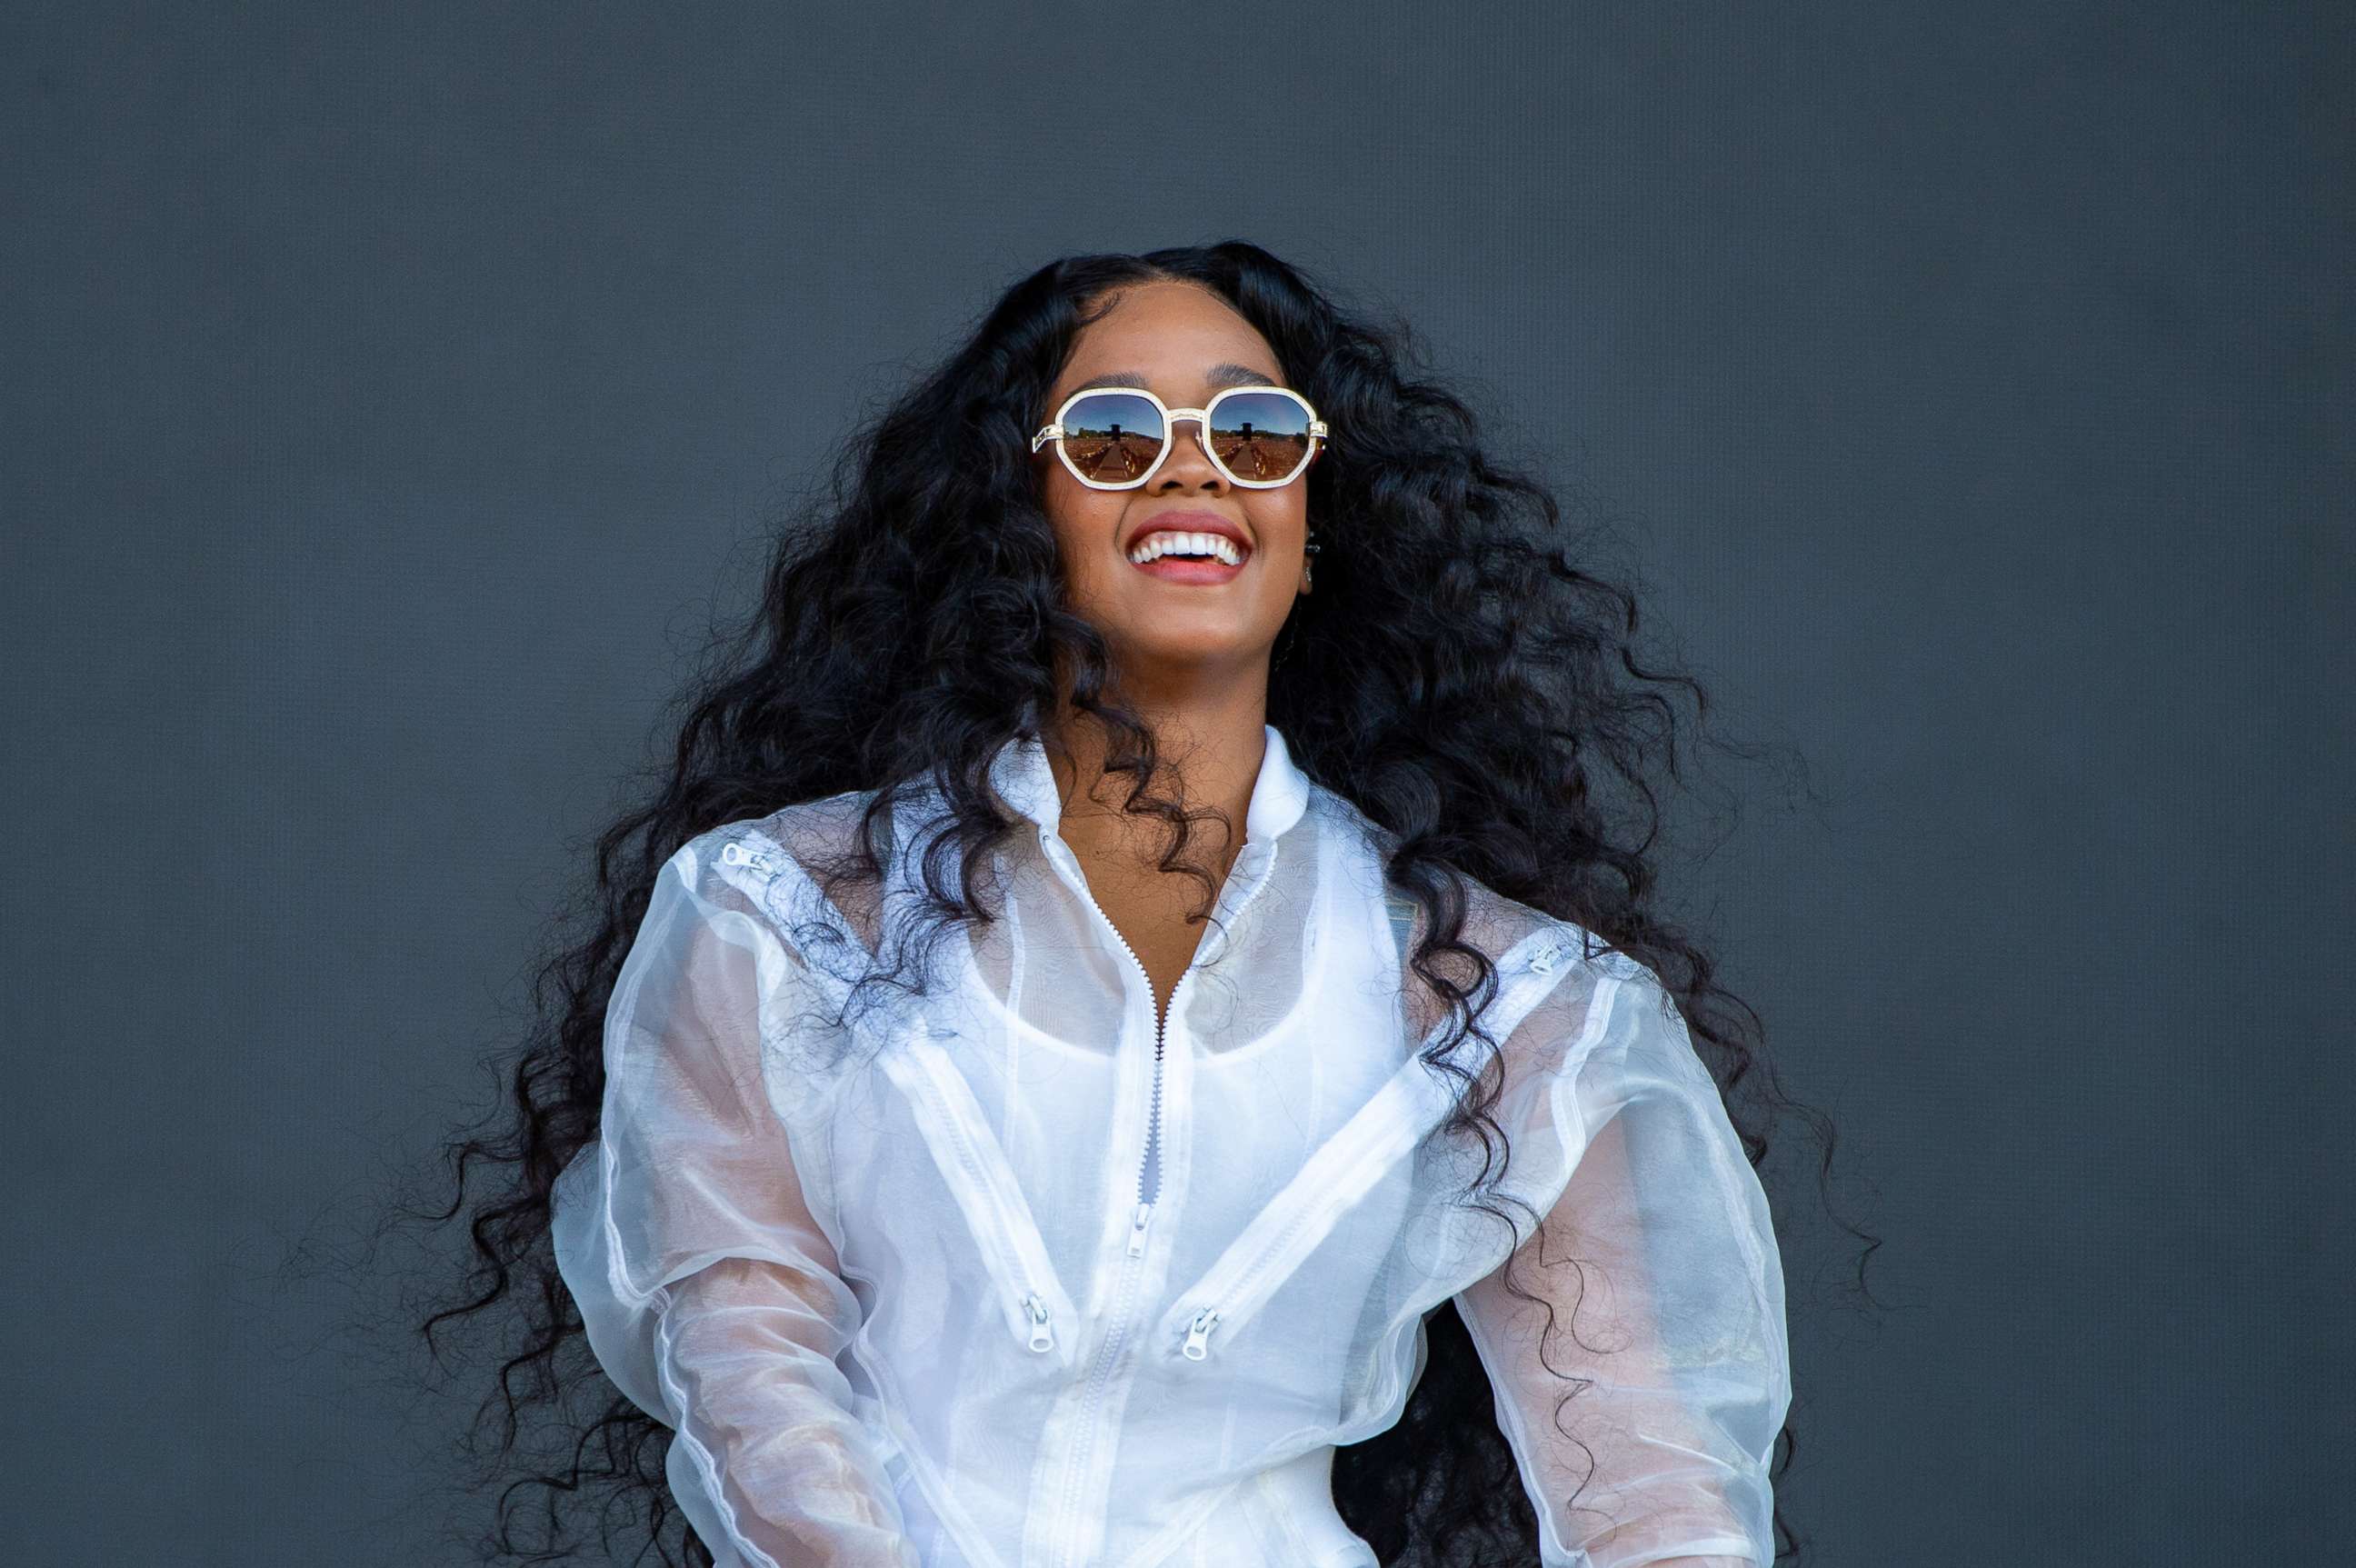 PHOTO: H.E.R. performs on the main stage during Wireless Festival at Finsbury Park, July 8, 2022 in London.